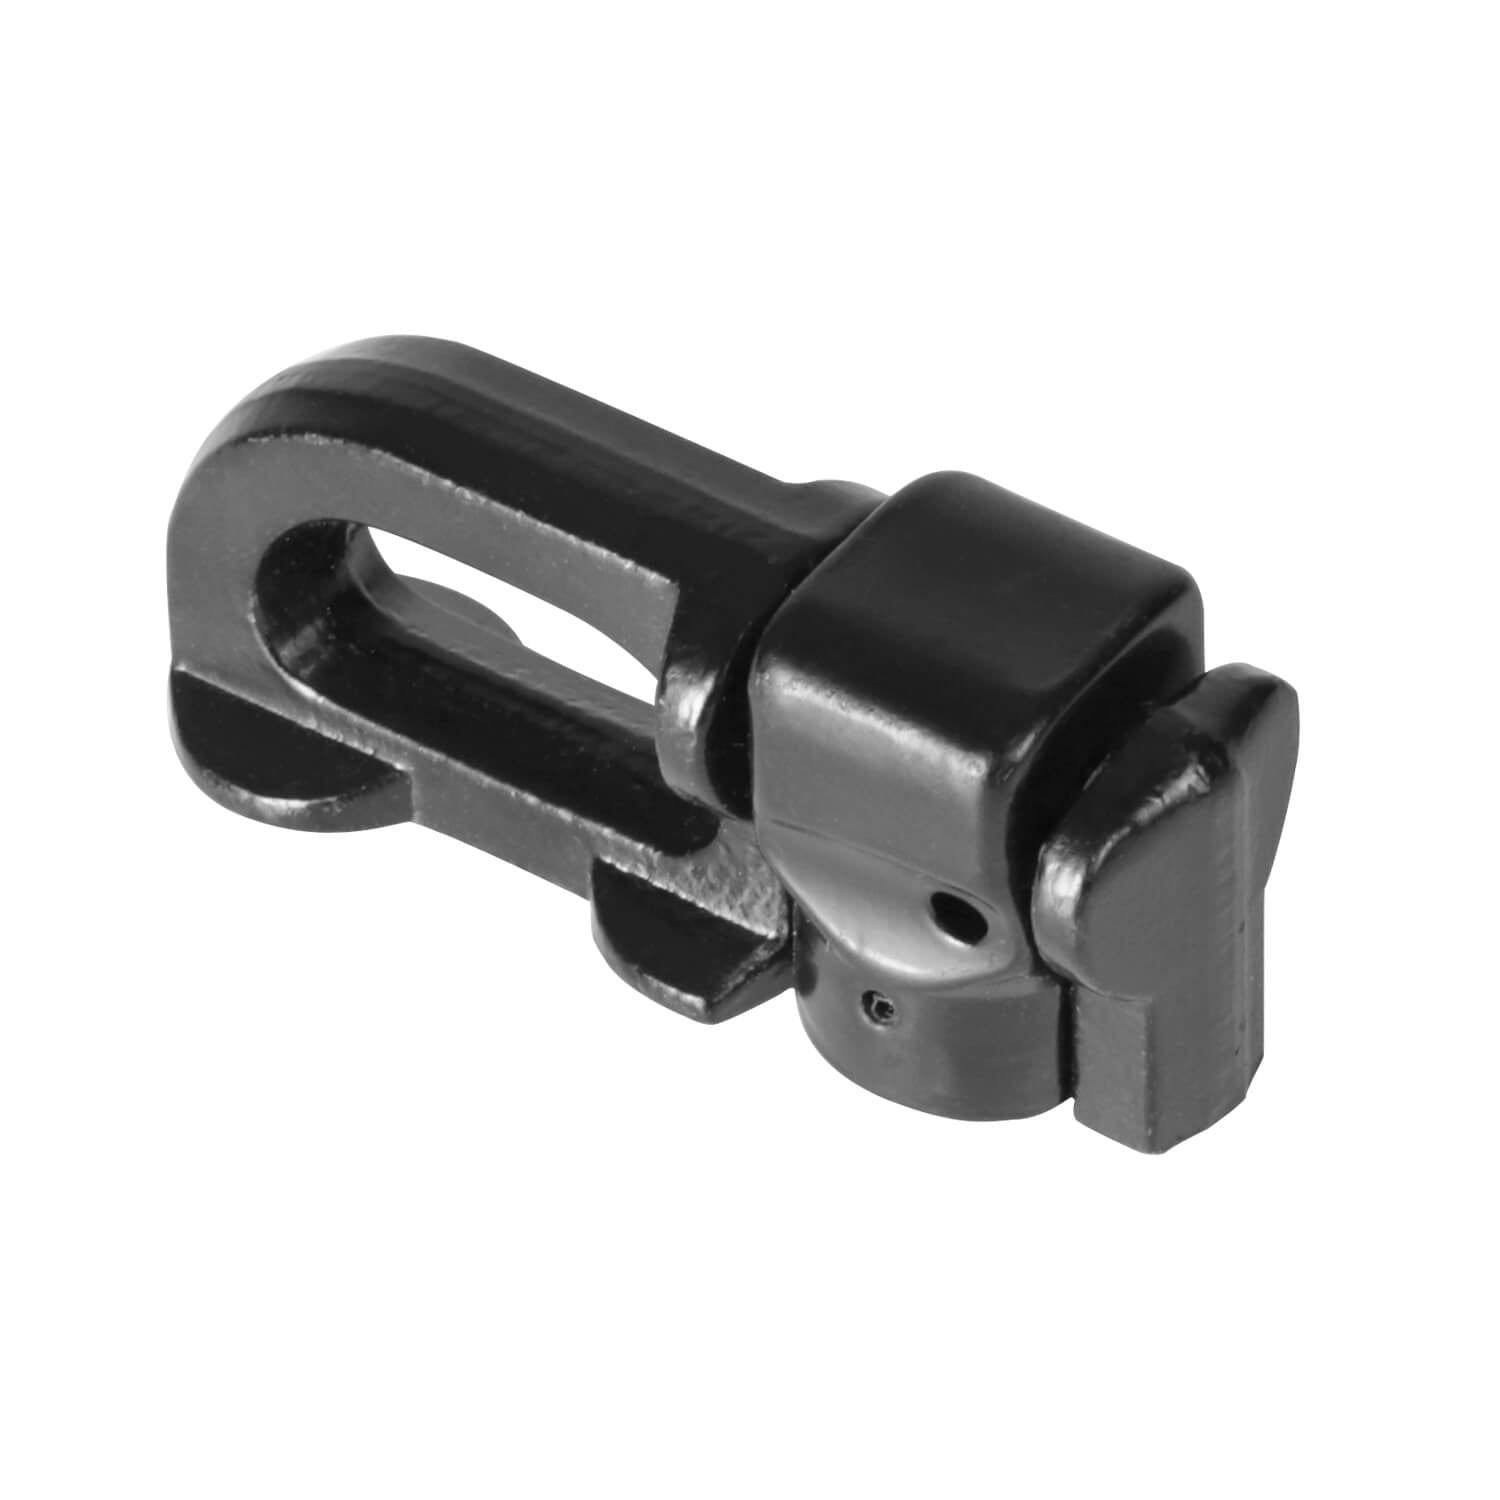 US Cargo Control Double Stud L Track Fitting With Pear Link, Use With L  Track Rails In Your Truck Or Trailer To Create Instant Tie-Down Anchor  Points